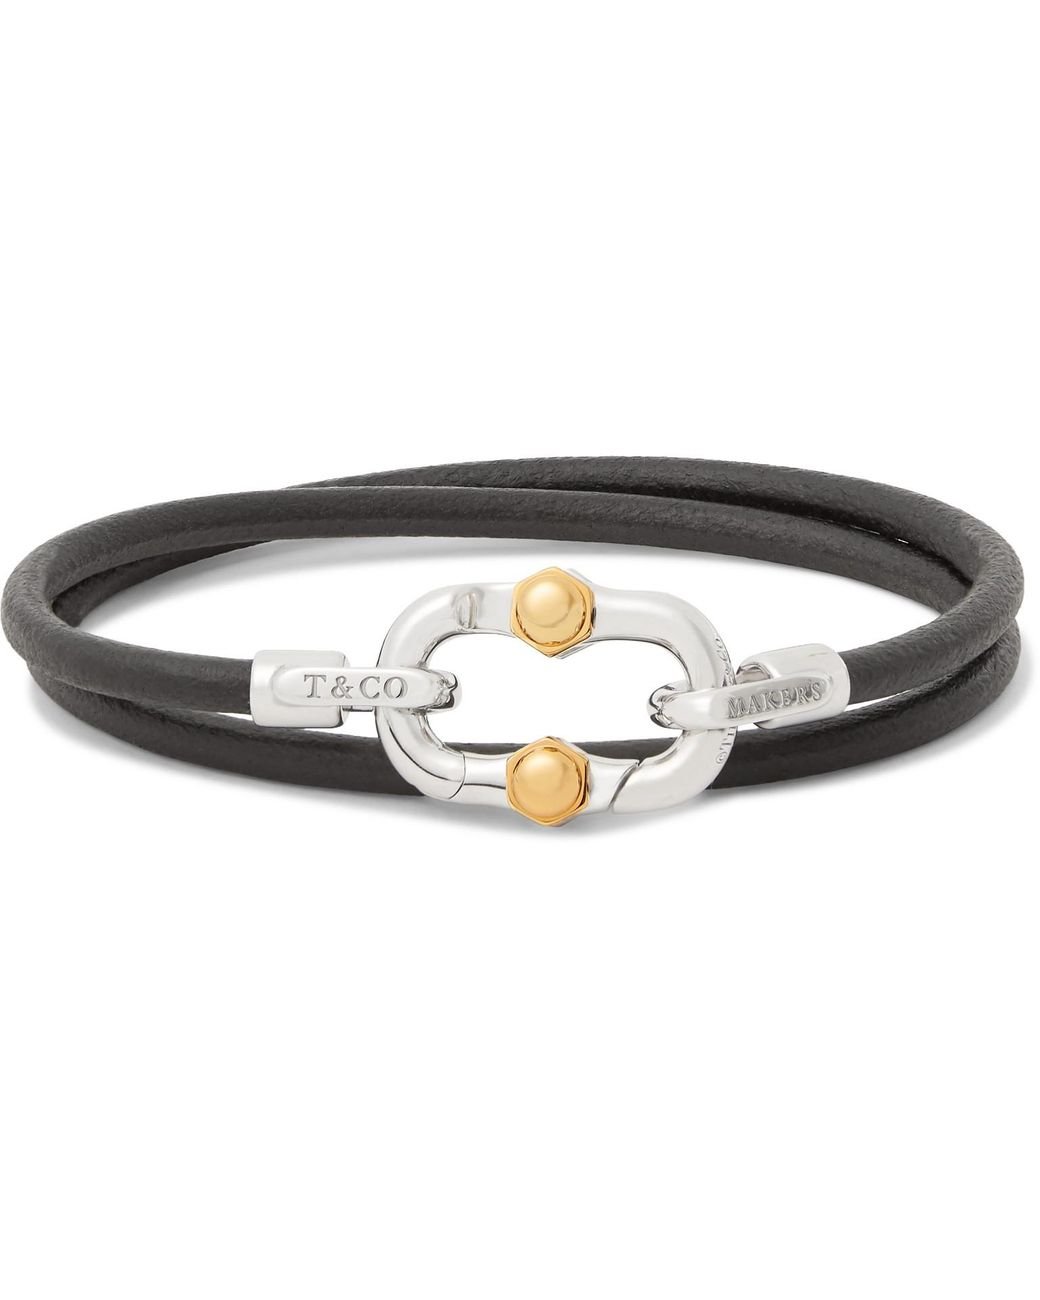 Tiffany & Co. Tiffany 1837 Makers Leather, Sterling Silver And 18-karat  Gold Wrap Bracelet in Black for Men | Lyst